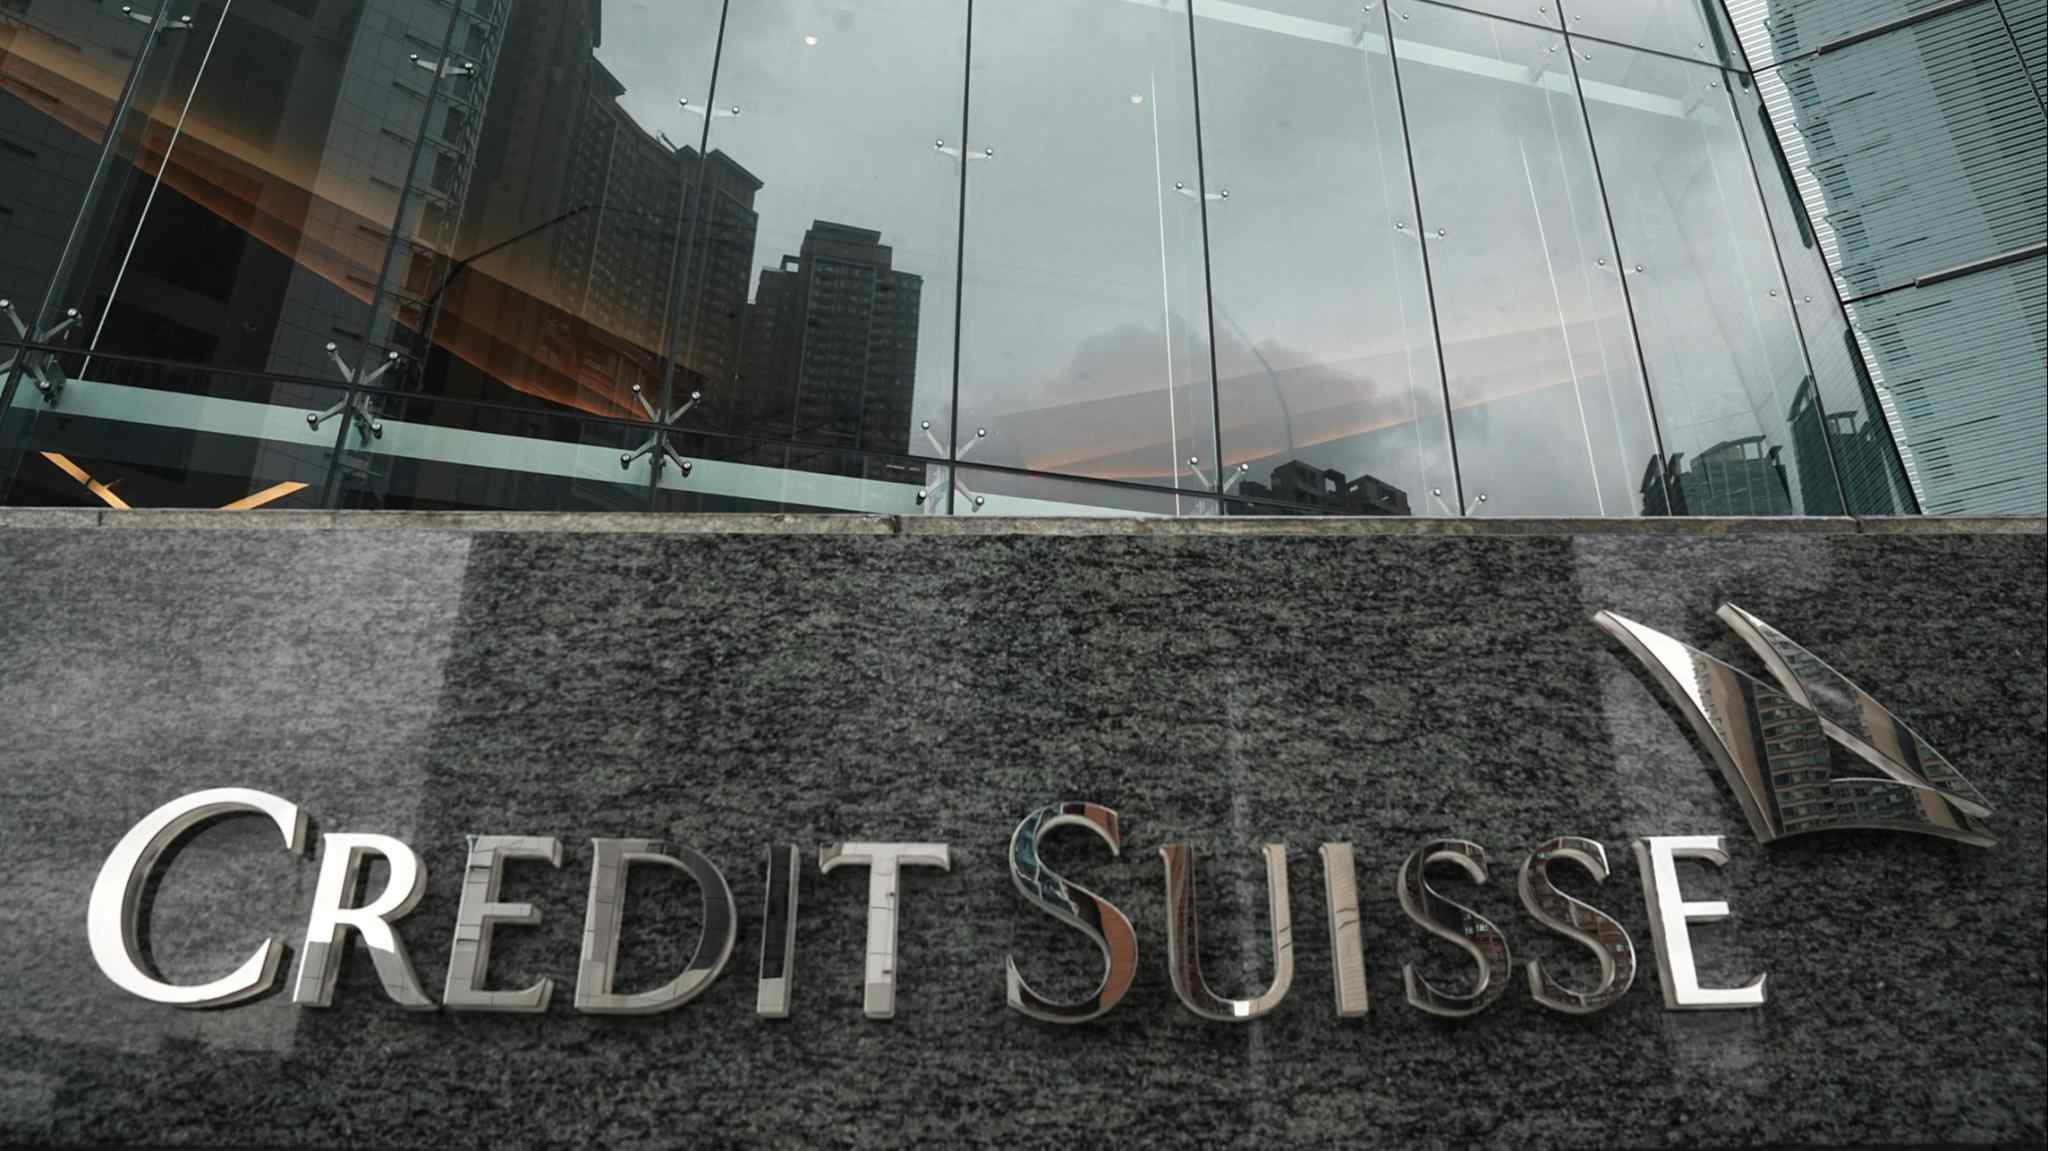 Asia investors ‘gobsmacked’ by $17bn Credit Suisse bond wipeout